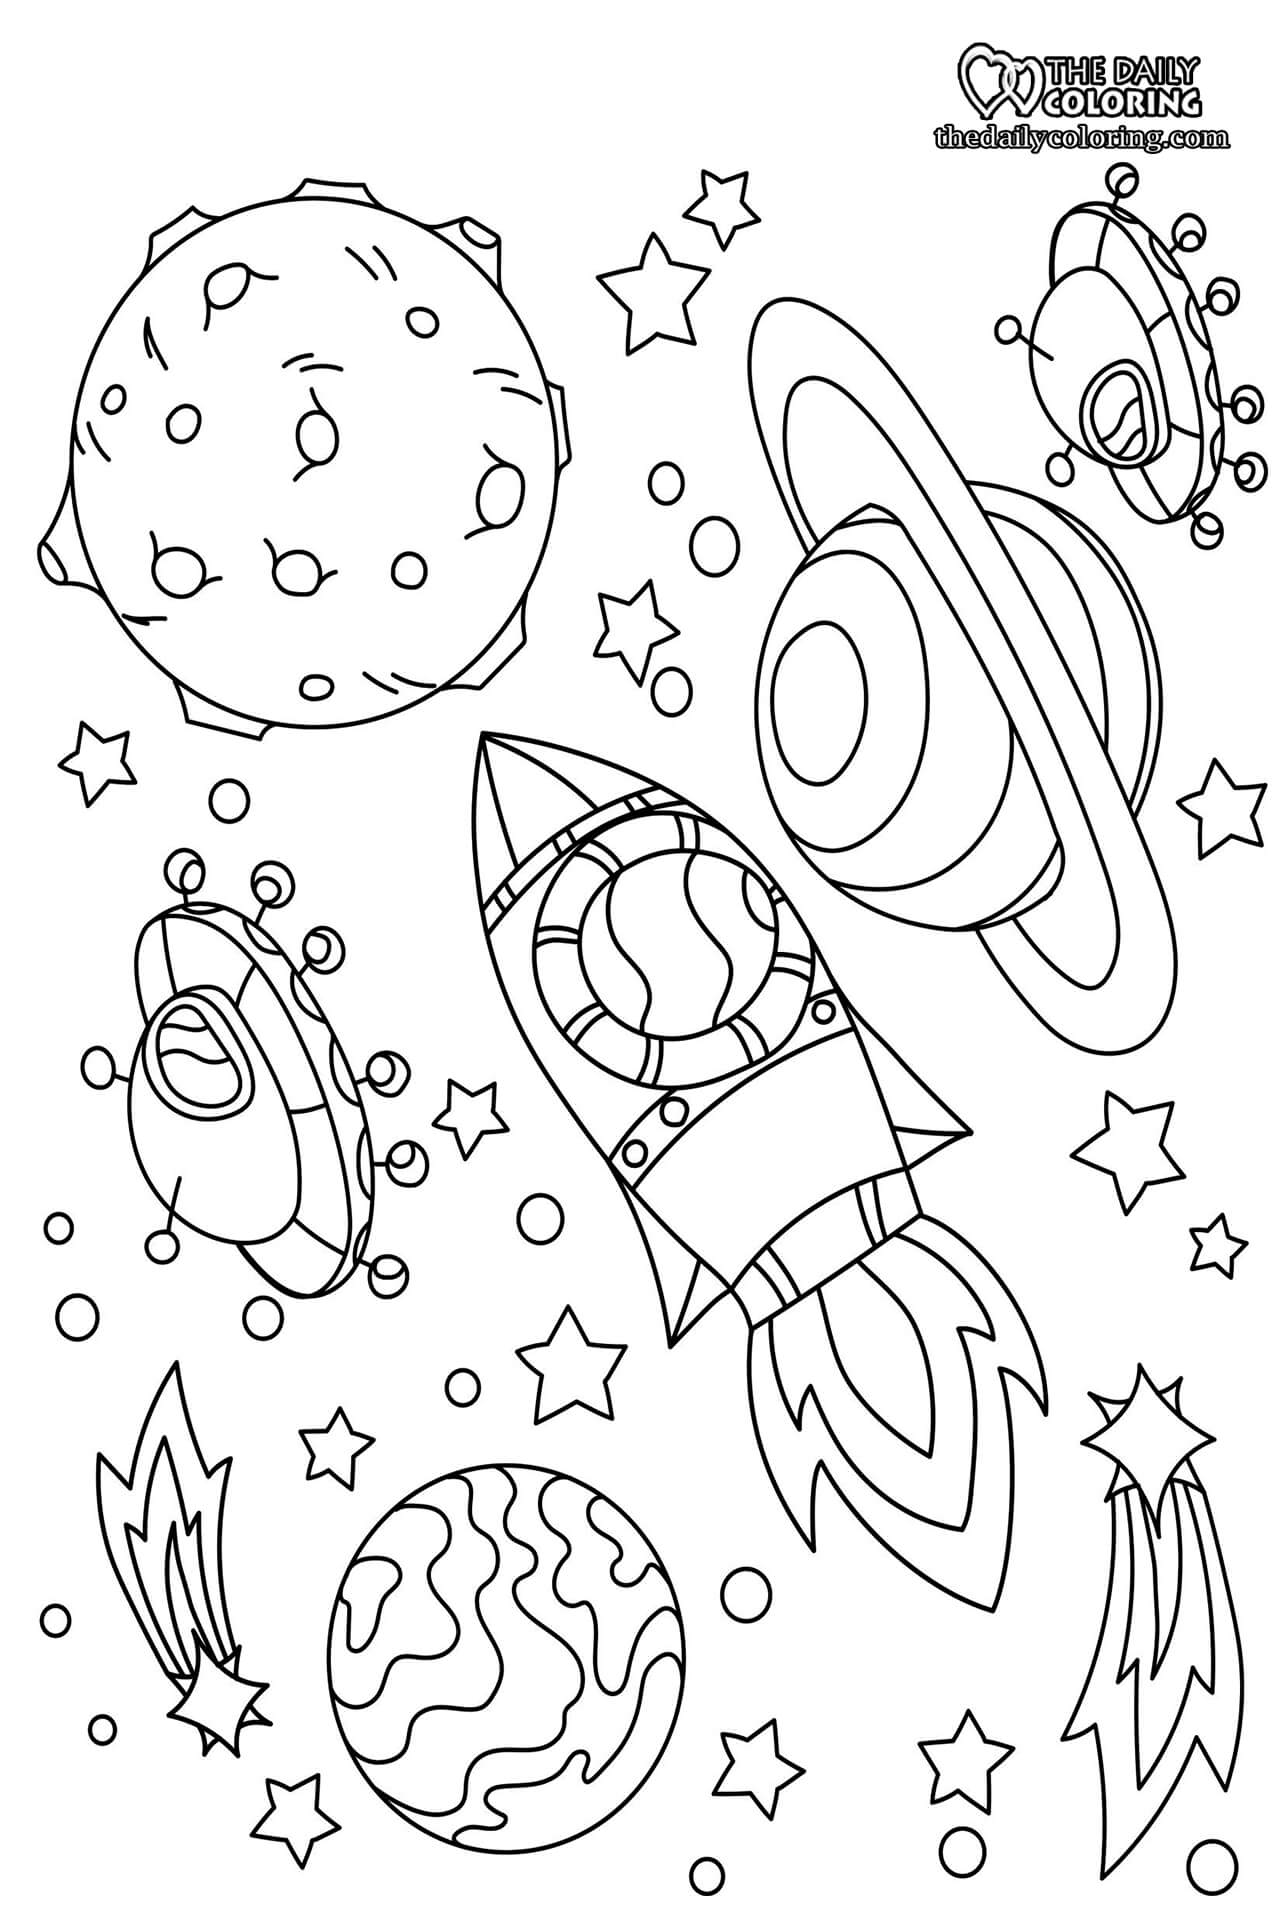 Space coloring pages rfreecoloringpages